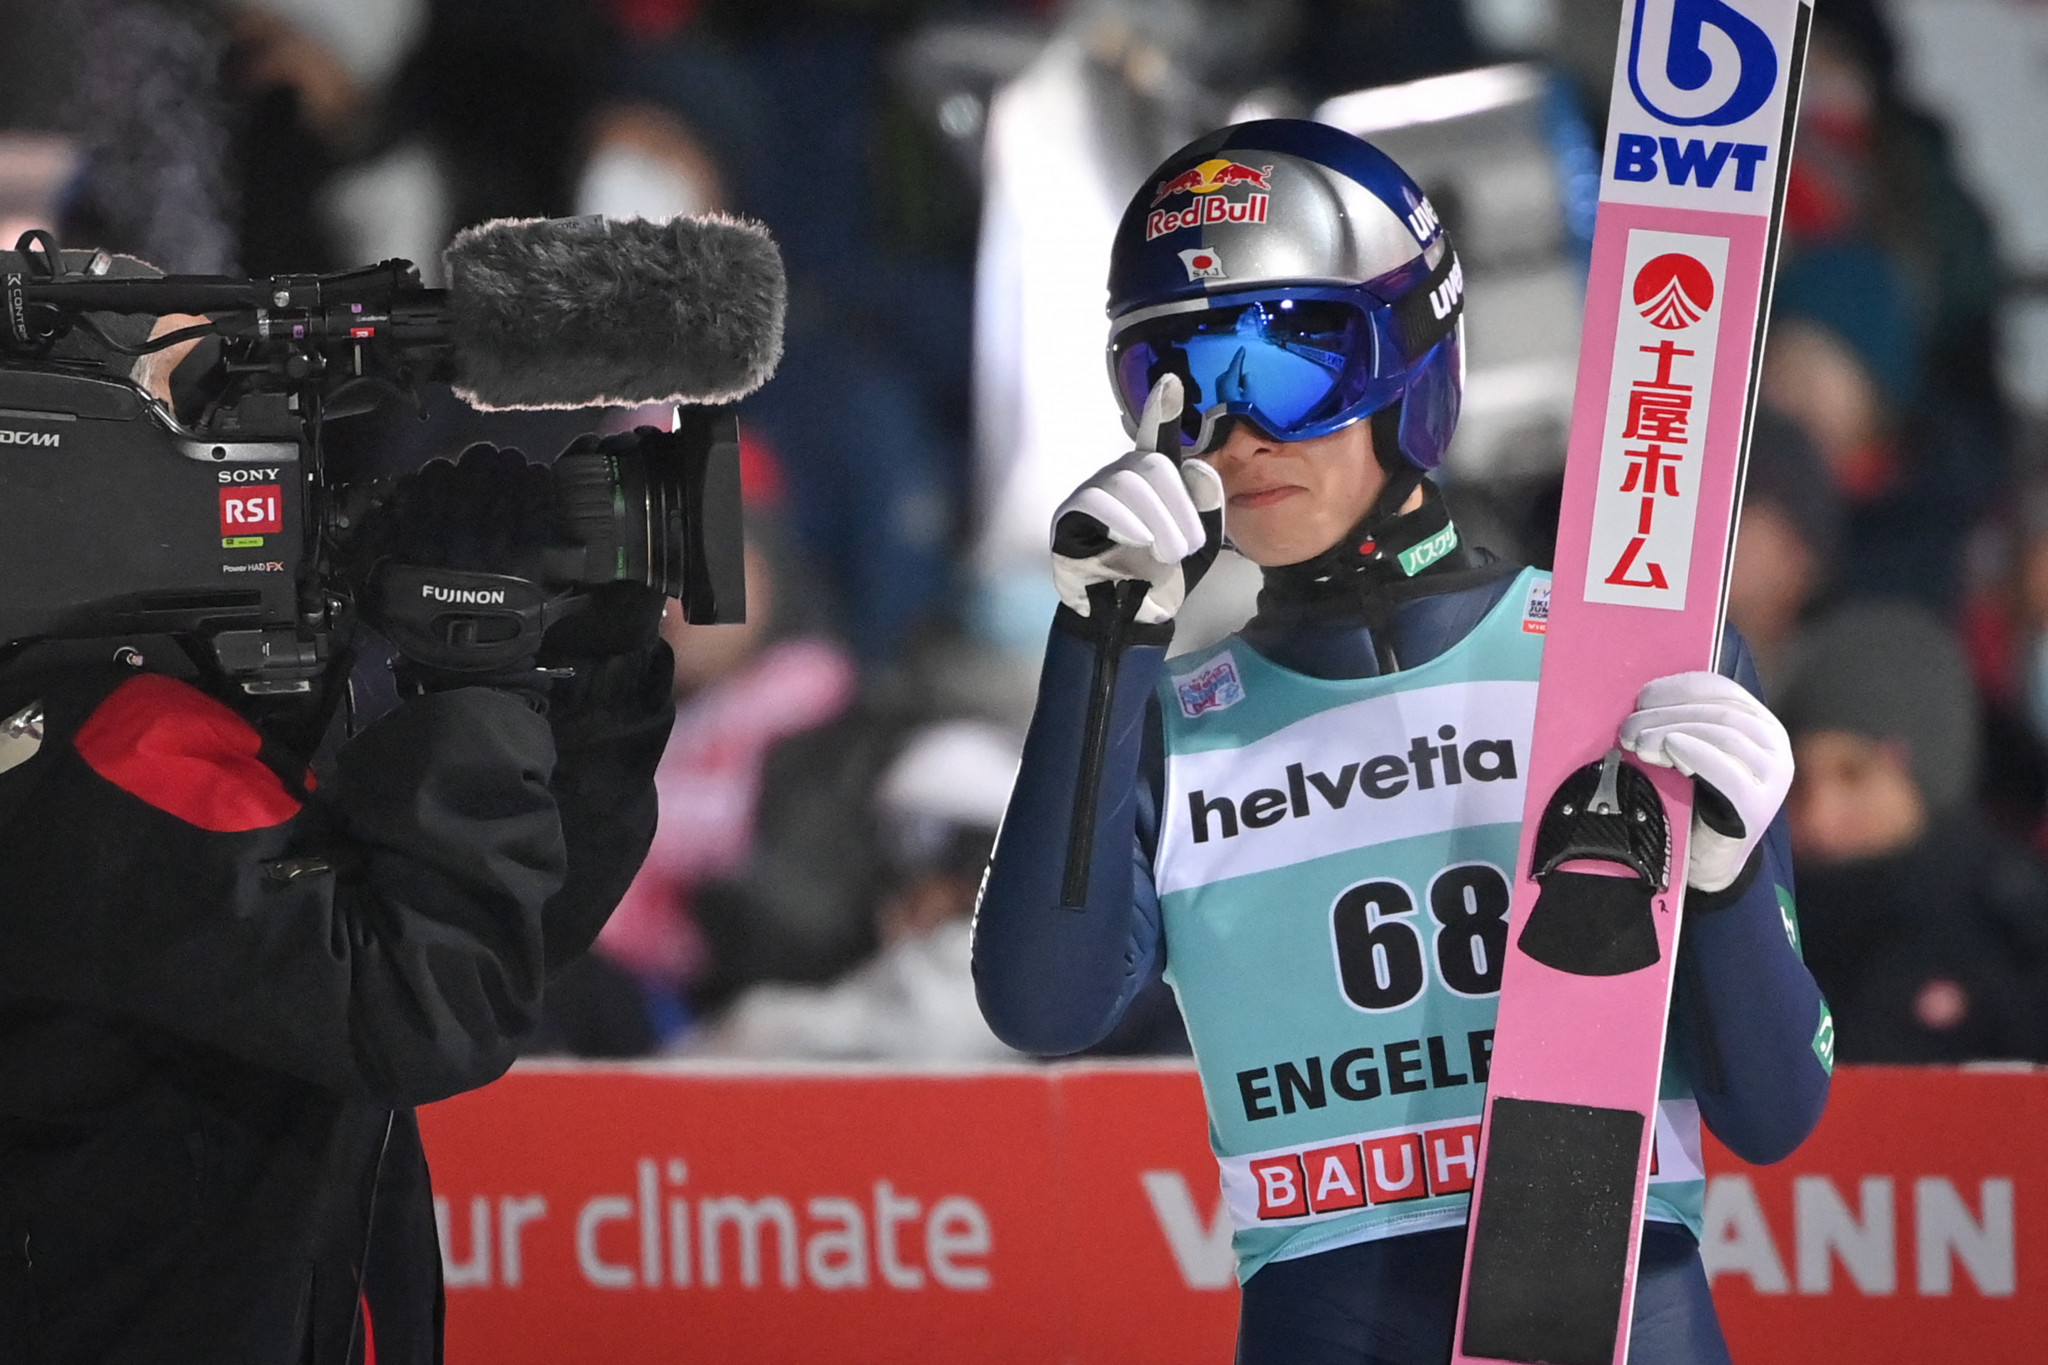 Ryōyū Kobayashi secured his third World Cup win of the season in Engelberg ©Getty Images